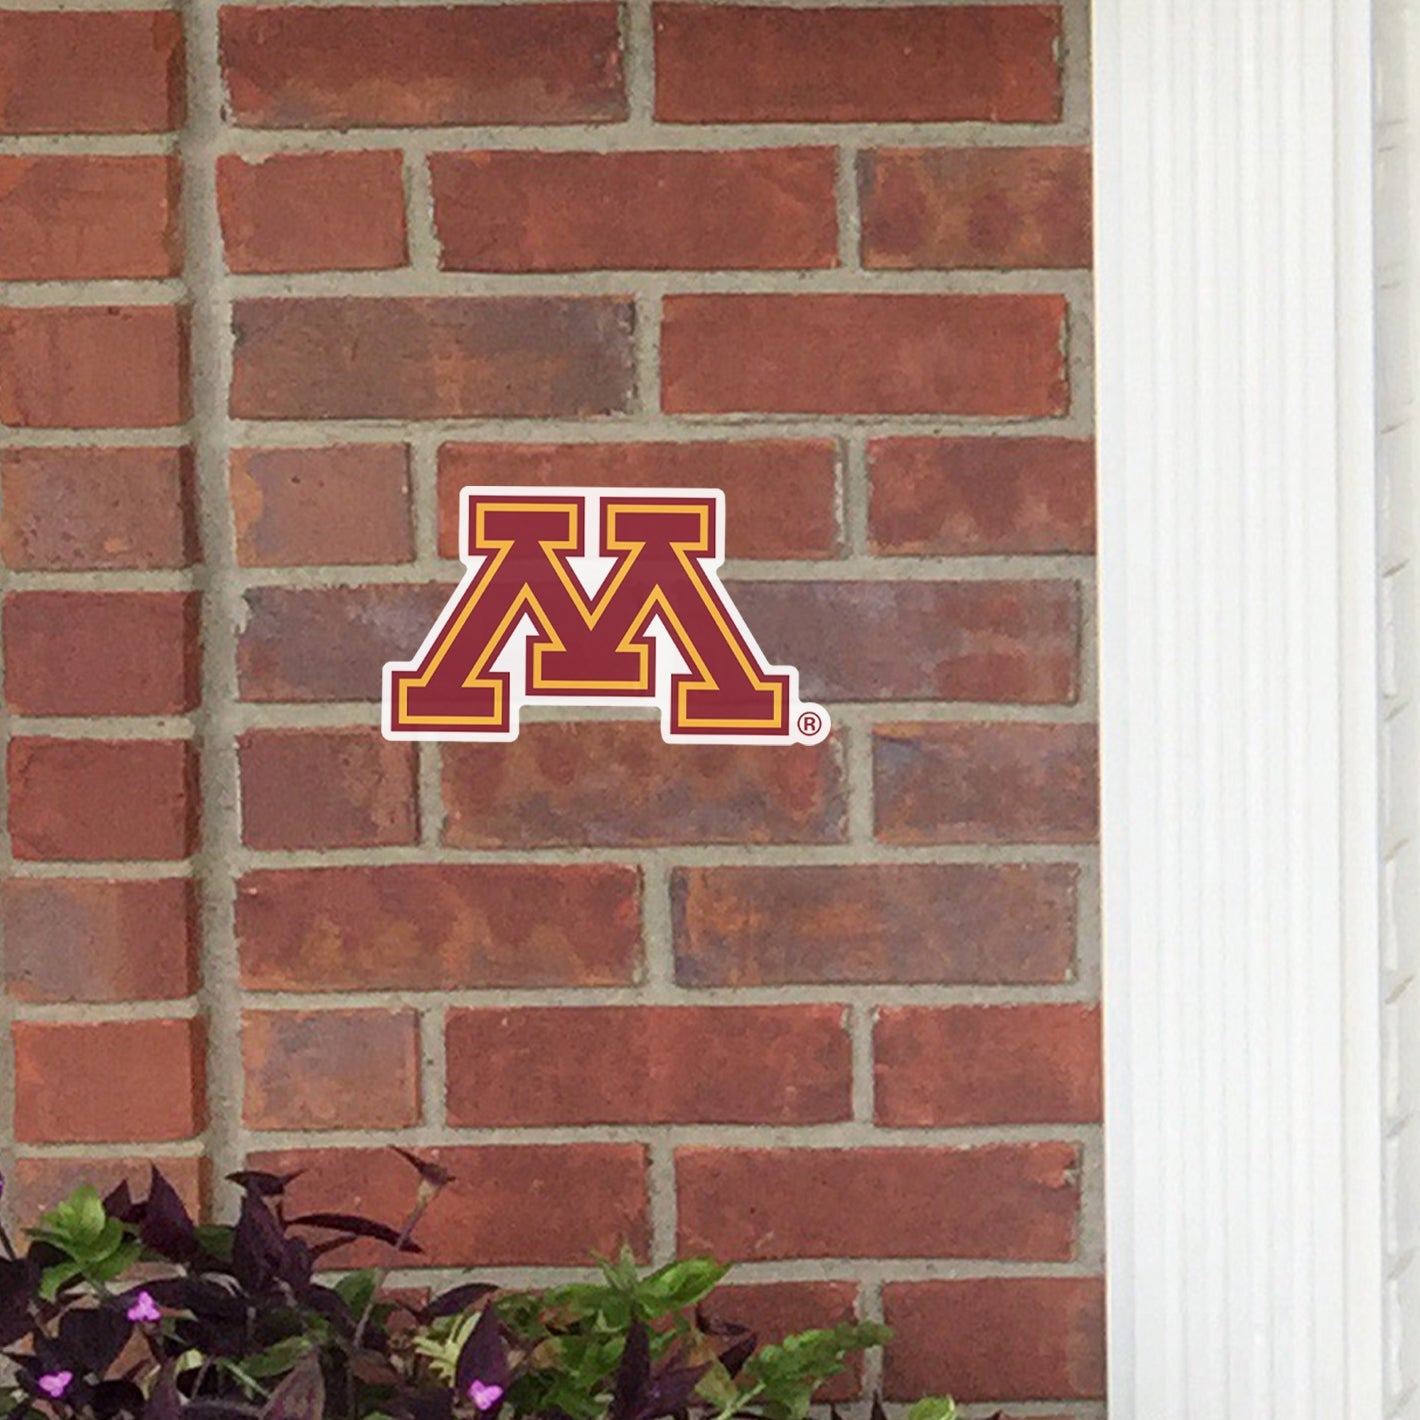 Minnesota Golden Gophers: Outdoor Logo - Officially Licensed NCAA Outdoor Graphic